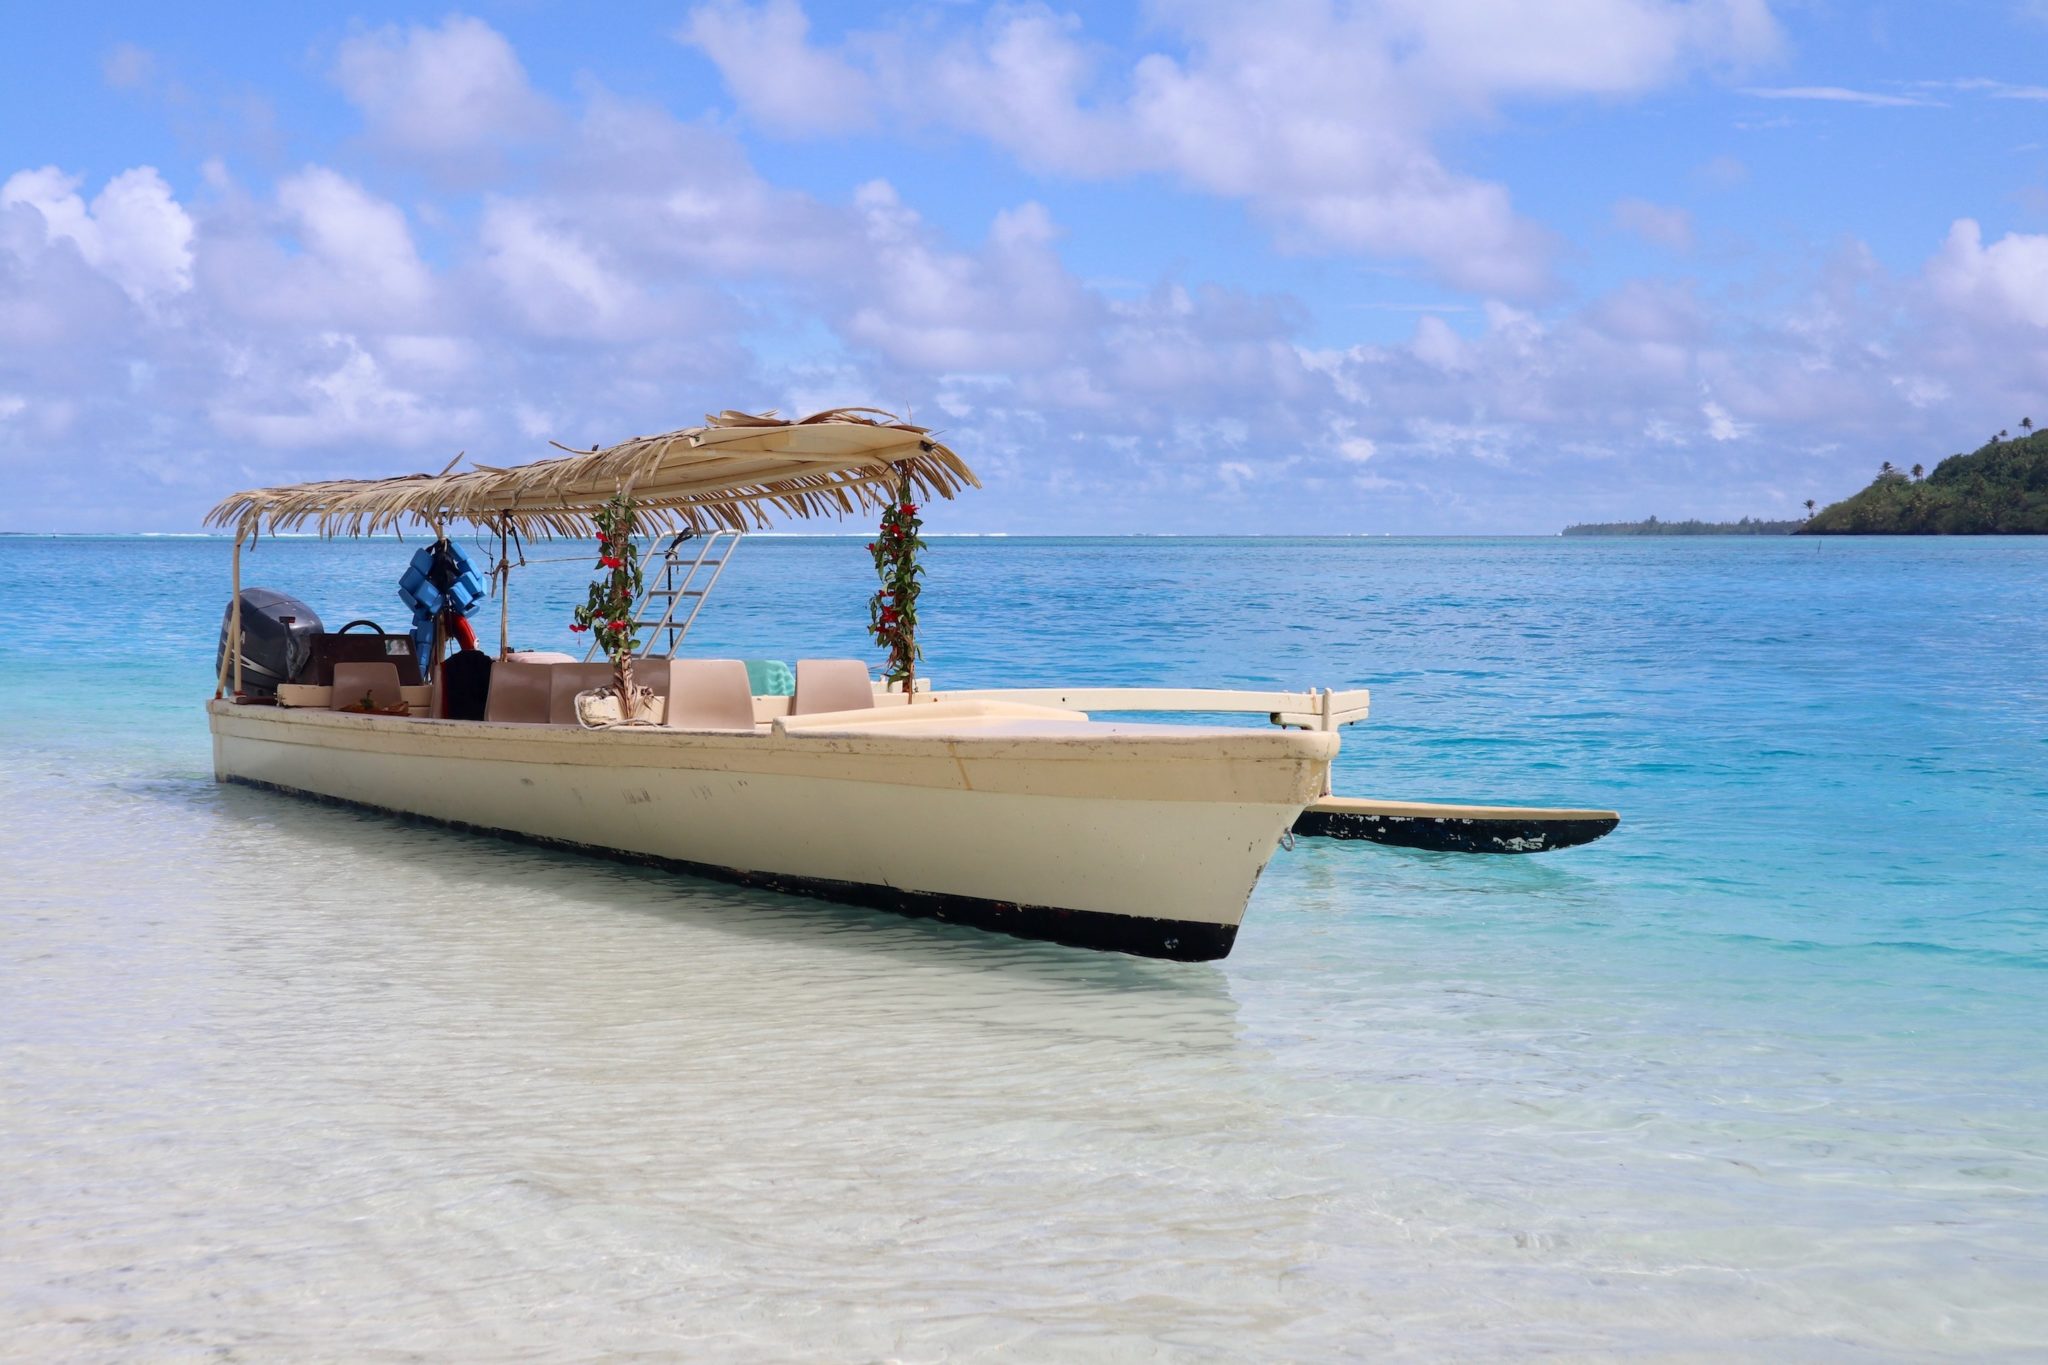 A traditional outrigger canoe style boat